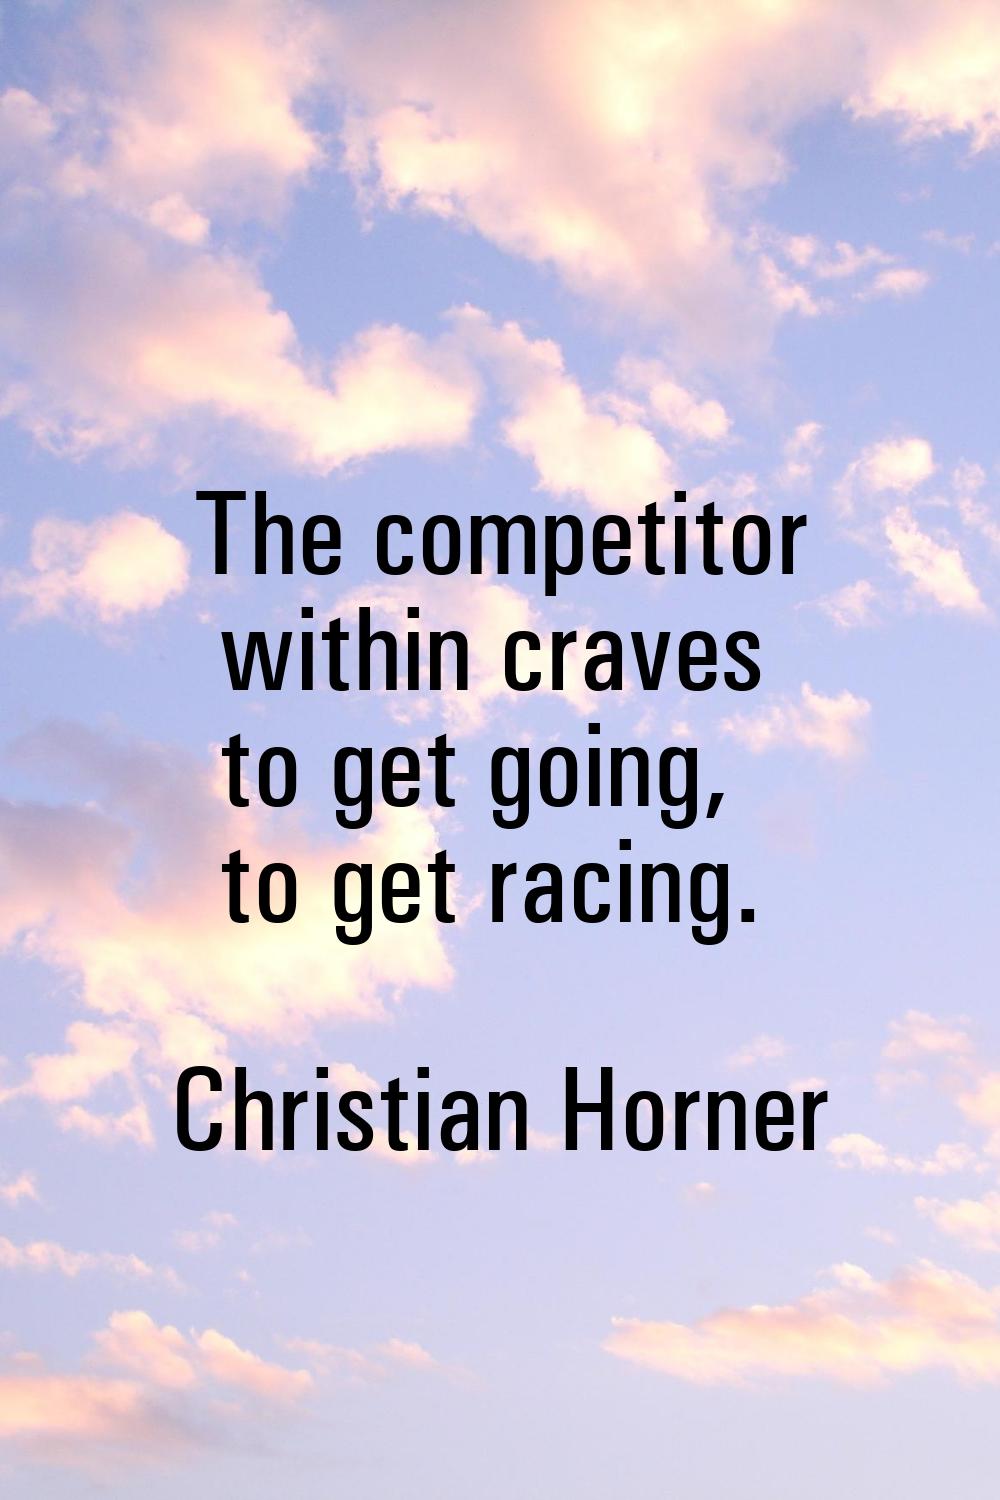 The competitor within craves to get going, to get racing.